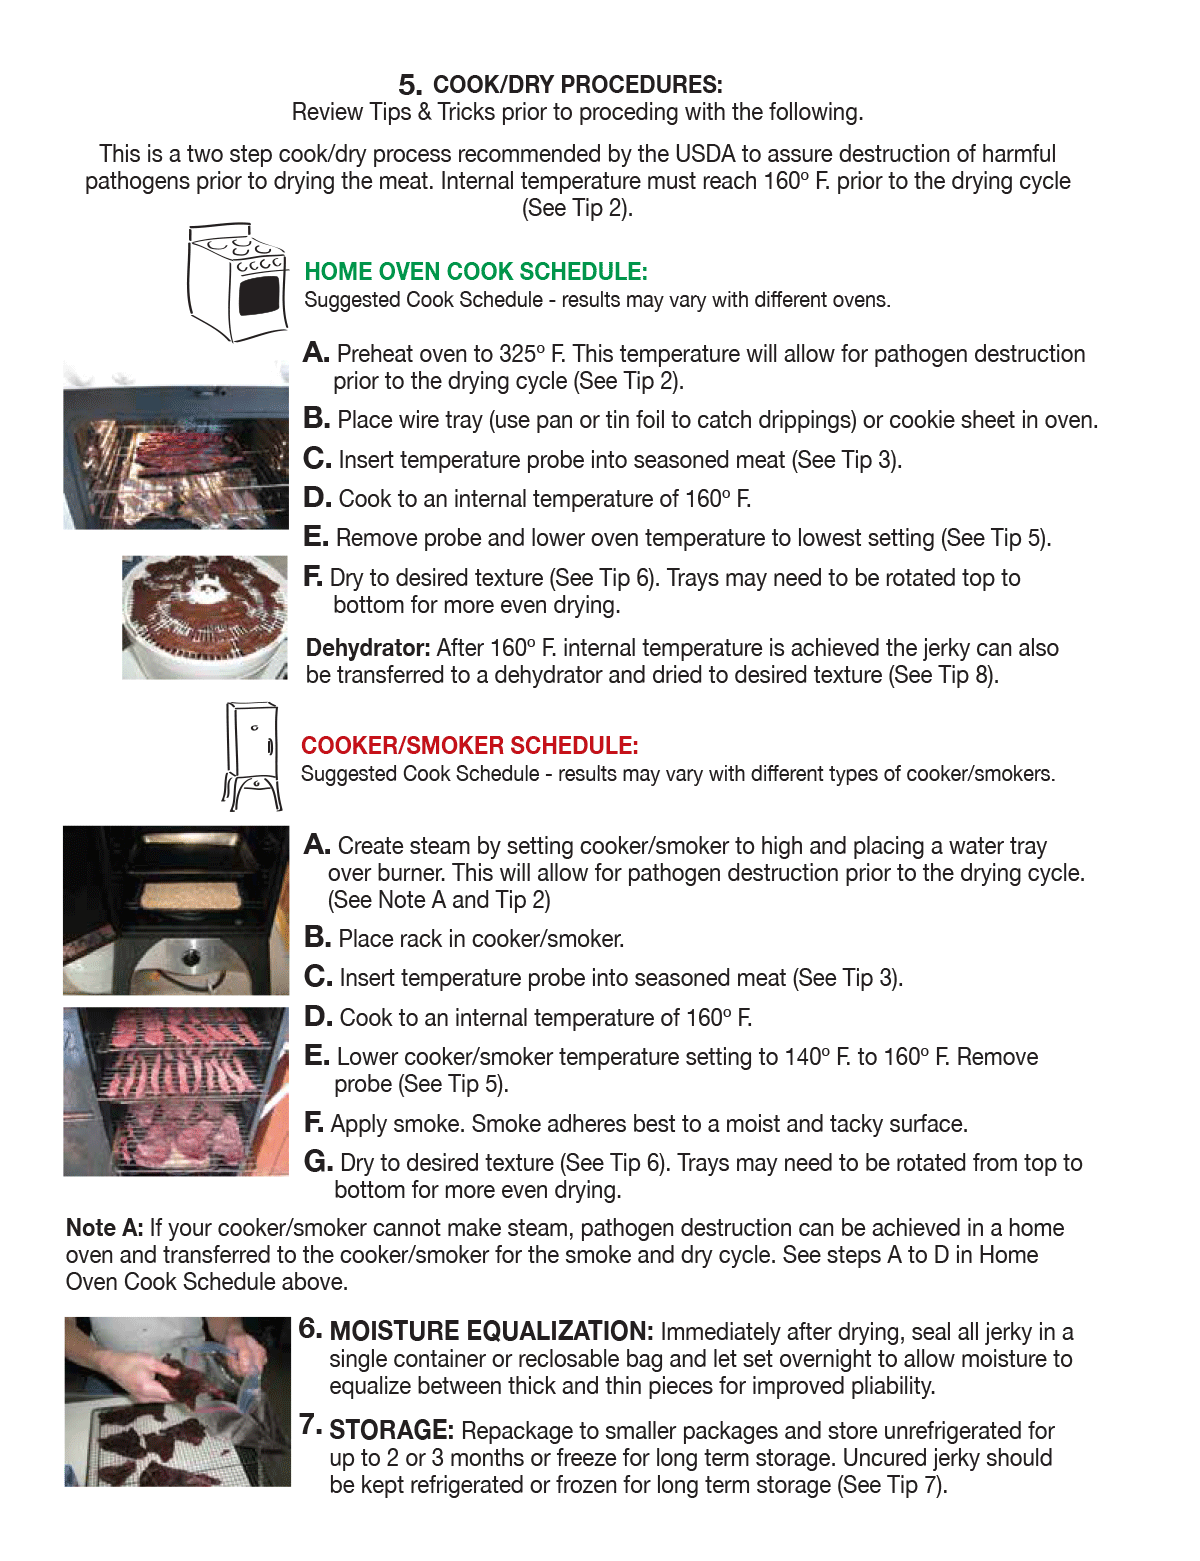 Whole Muscle Jerky Instructions